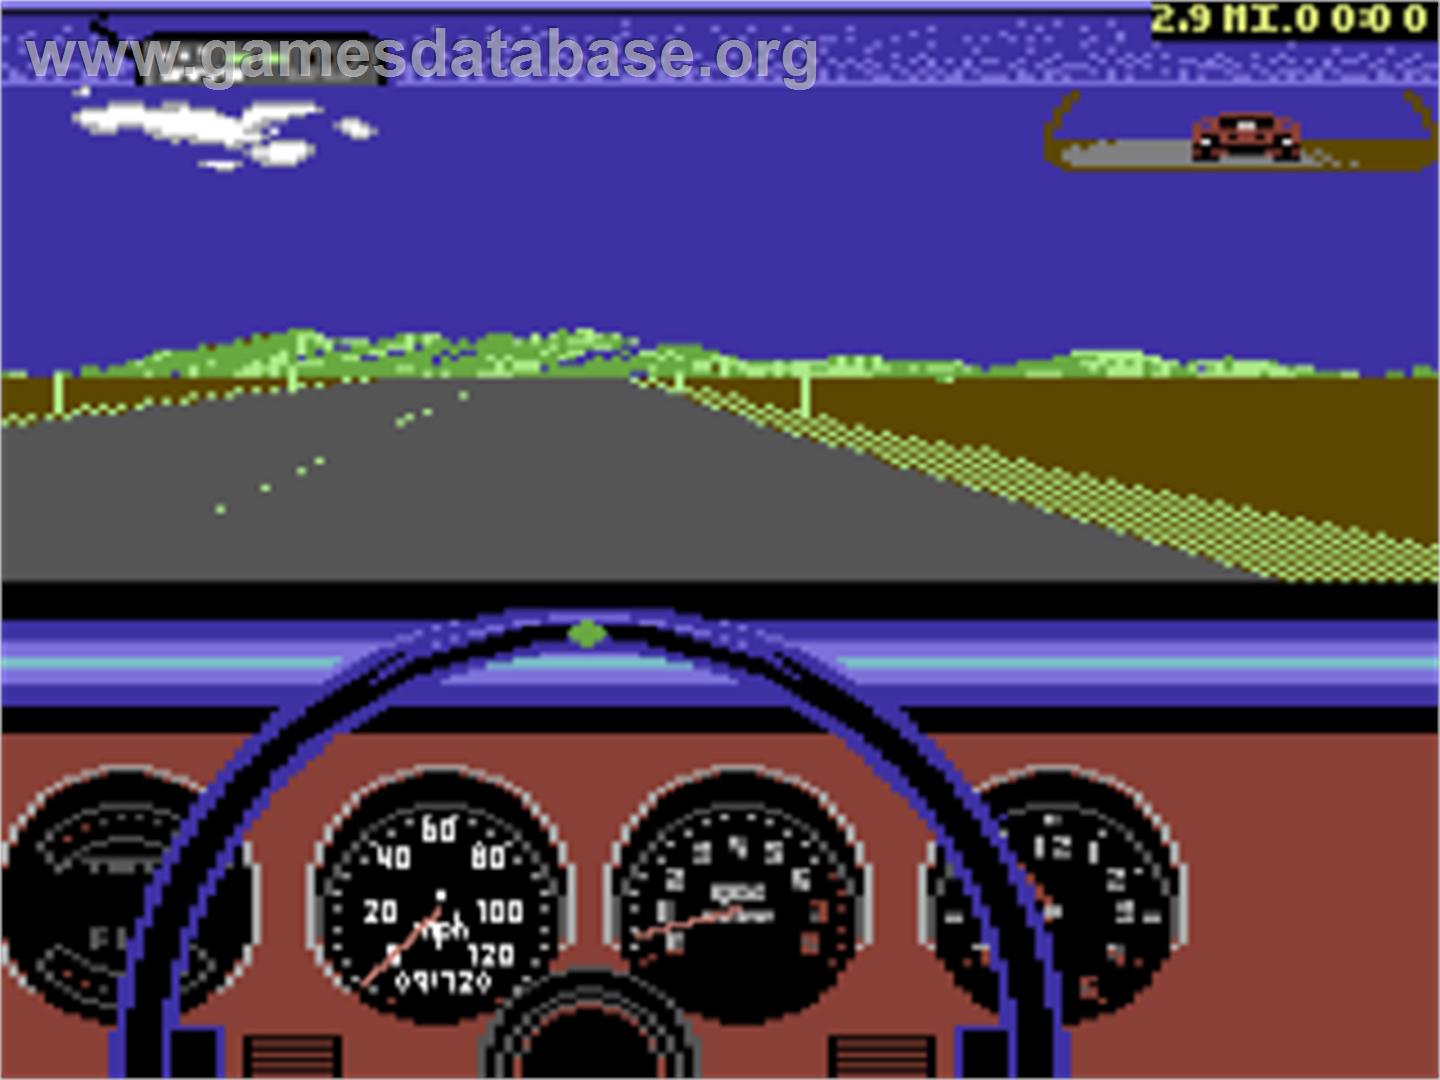 Test Drive II Car Disk: Musclecars - Commodore 64 - Artwork - In Game